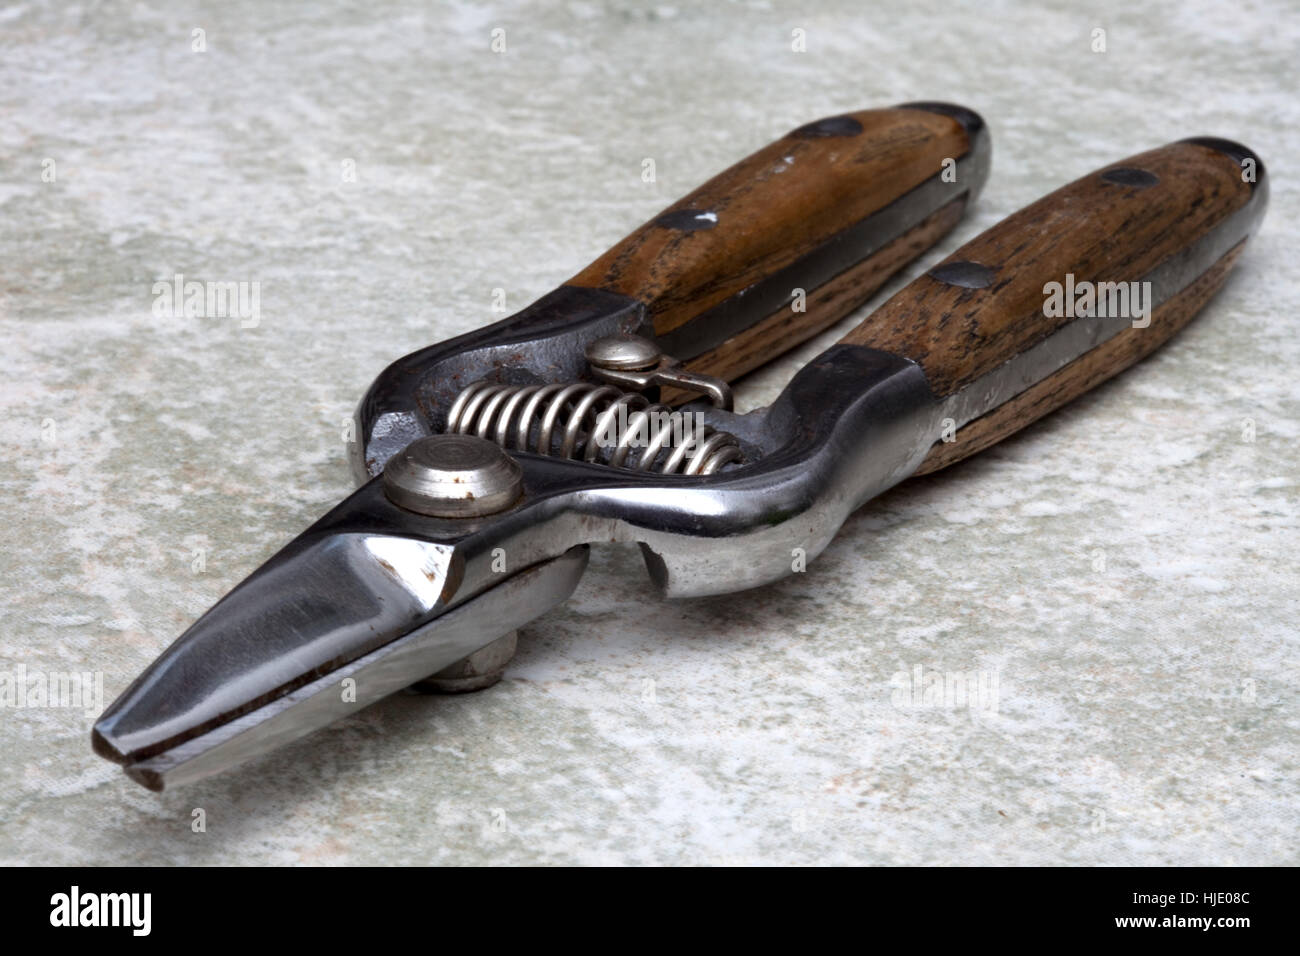 Stainless Steel Secateurs Stock Photo